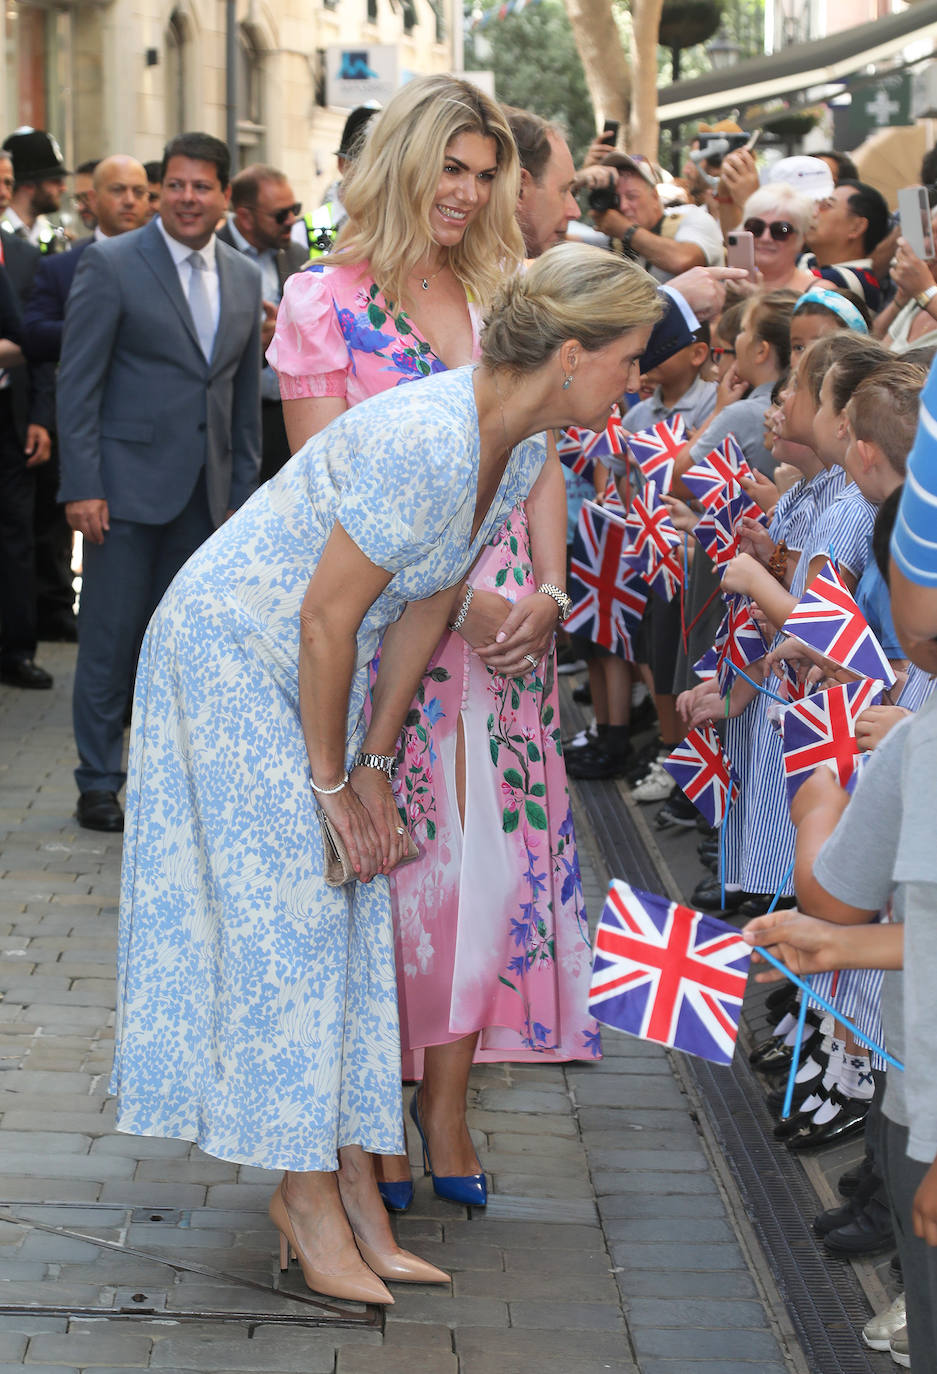 The Earl and Countess of Wessex during their second royal visit to the Rock